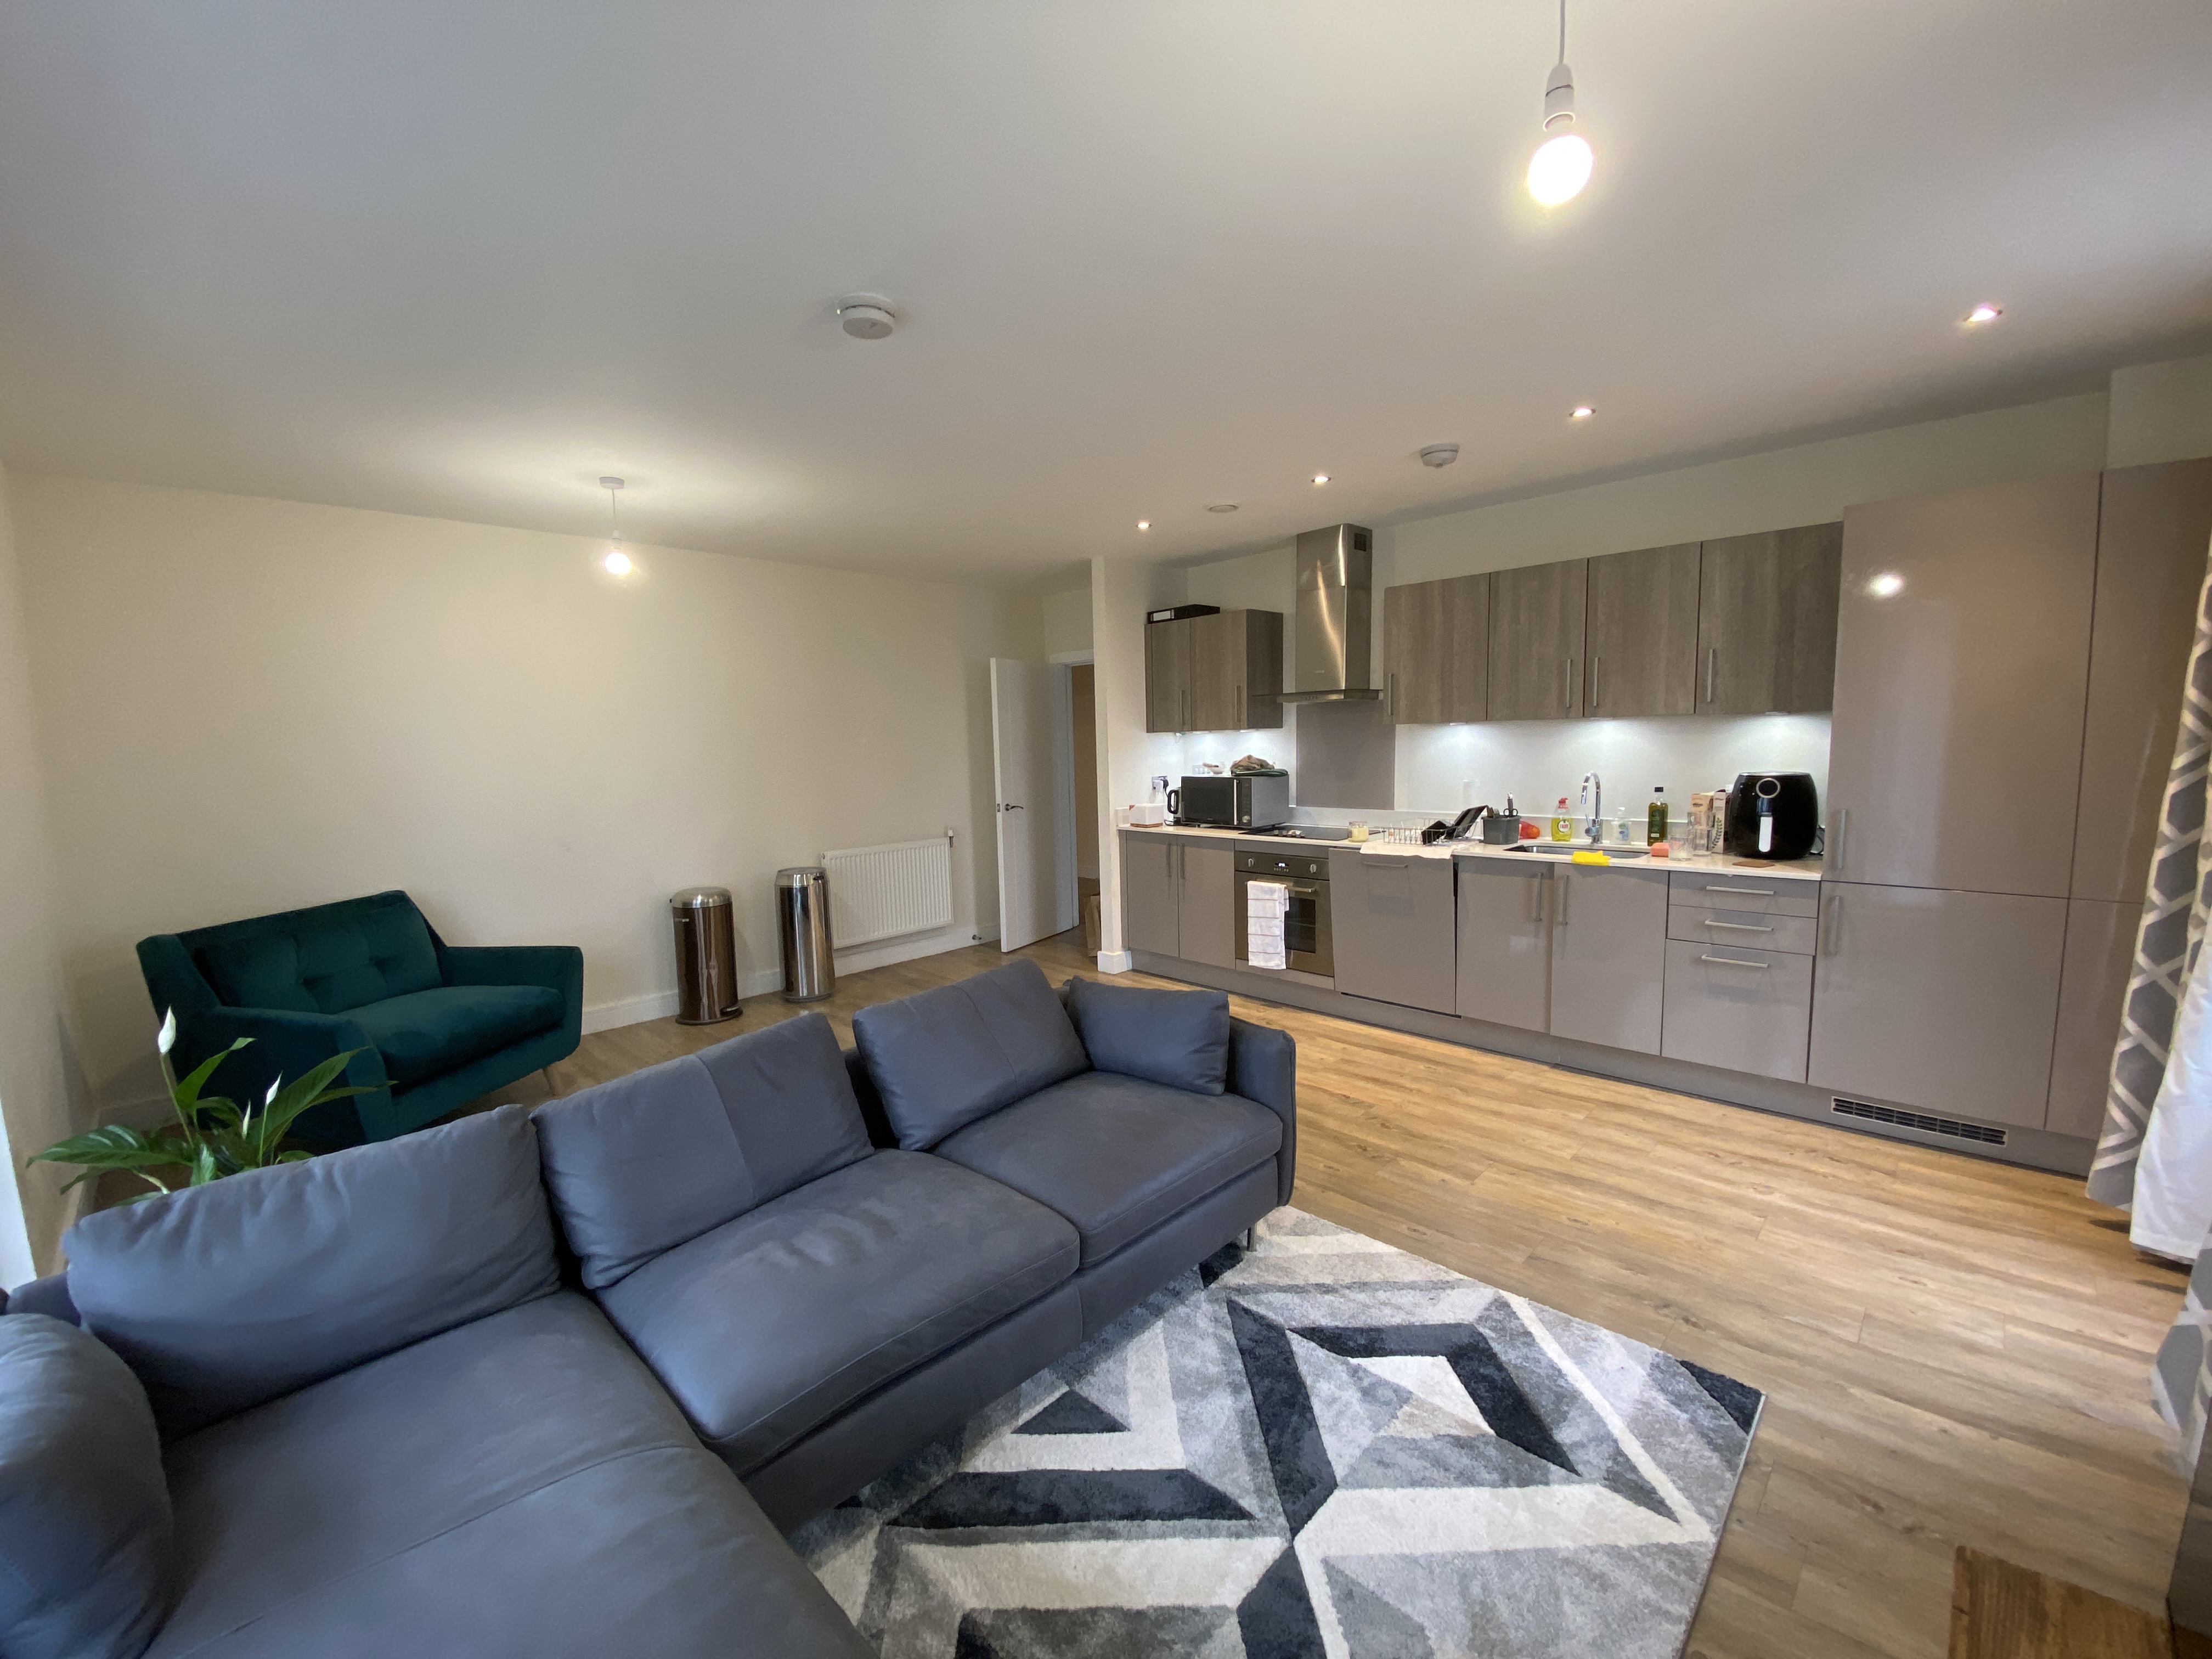 2 bed flat for sale - Property Image 1